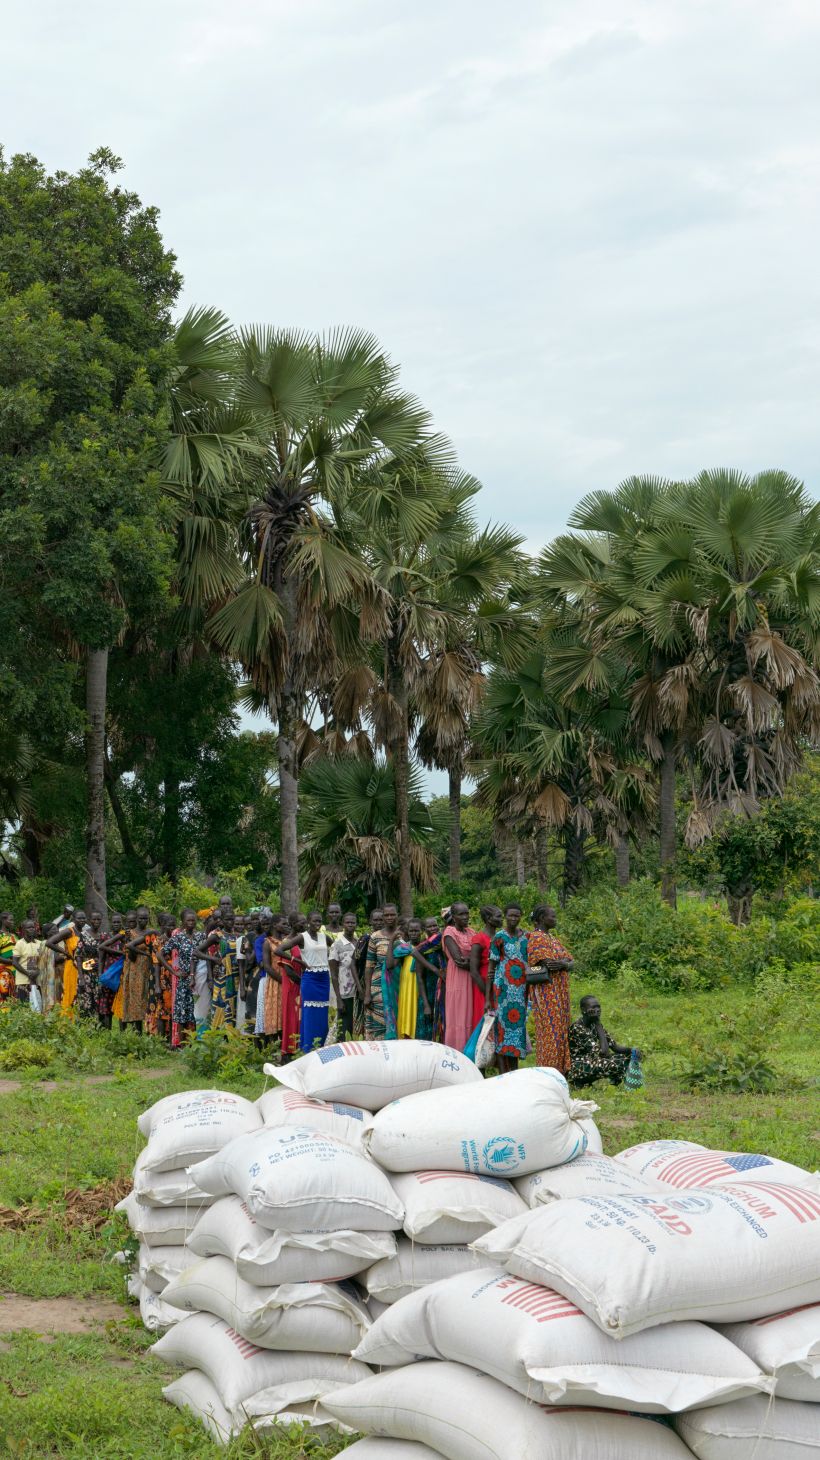 A photo of bags of food in a field with a large group of people in the background.